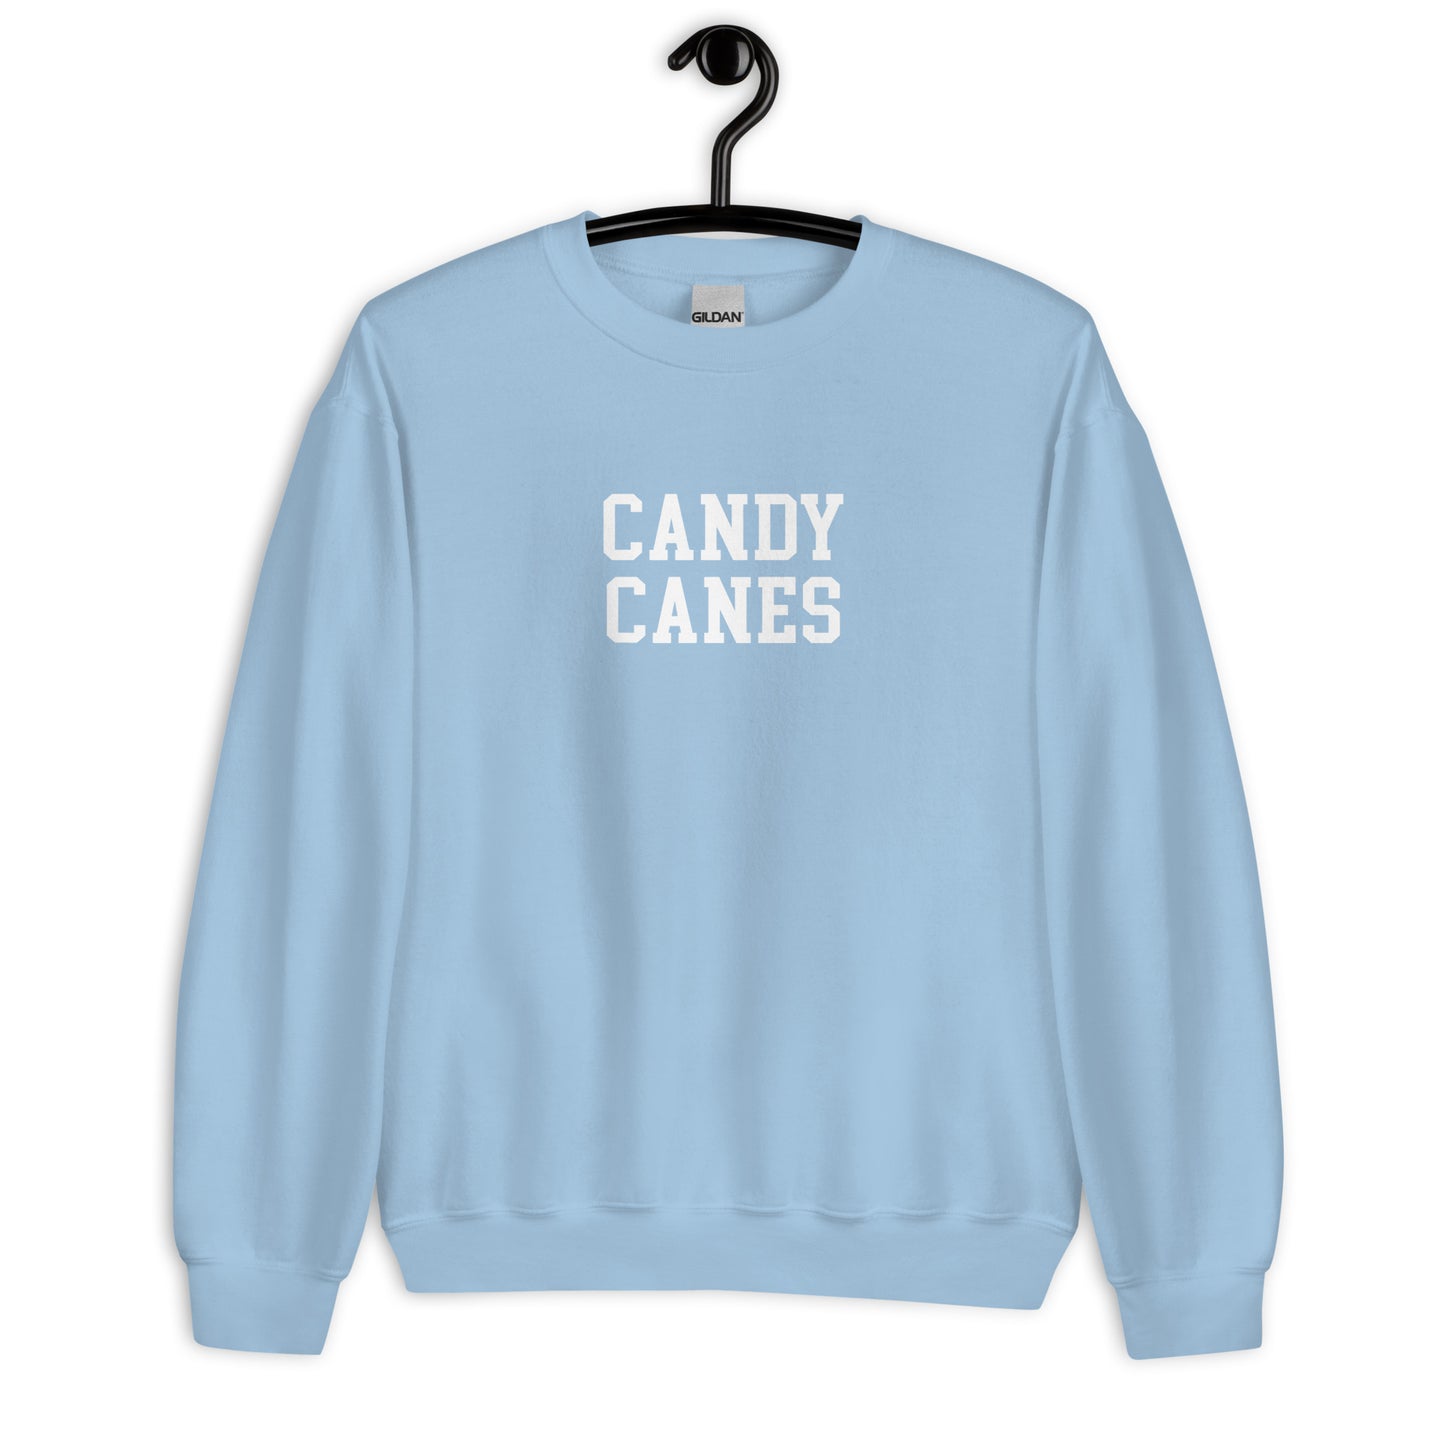 Candy Canes Sweatshirt - Straight Font